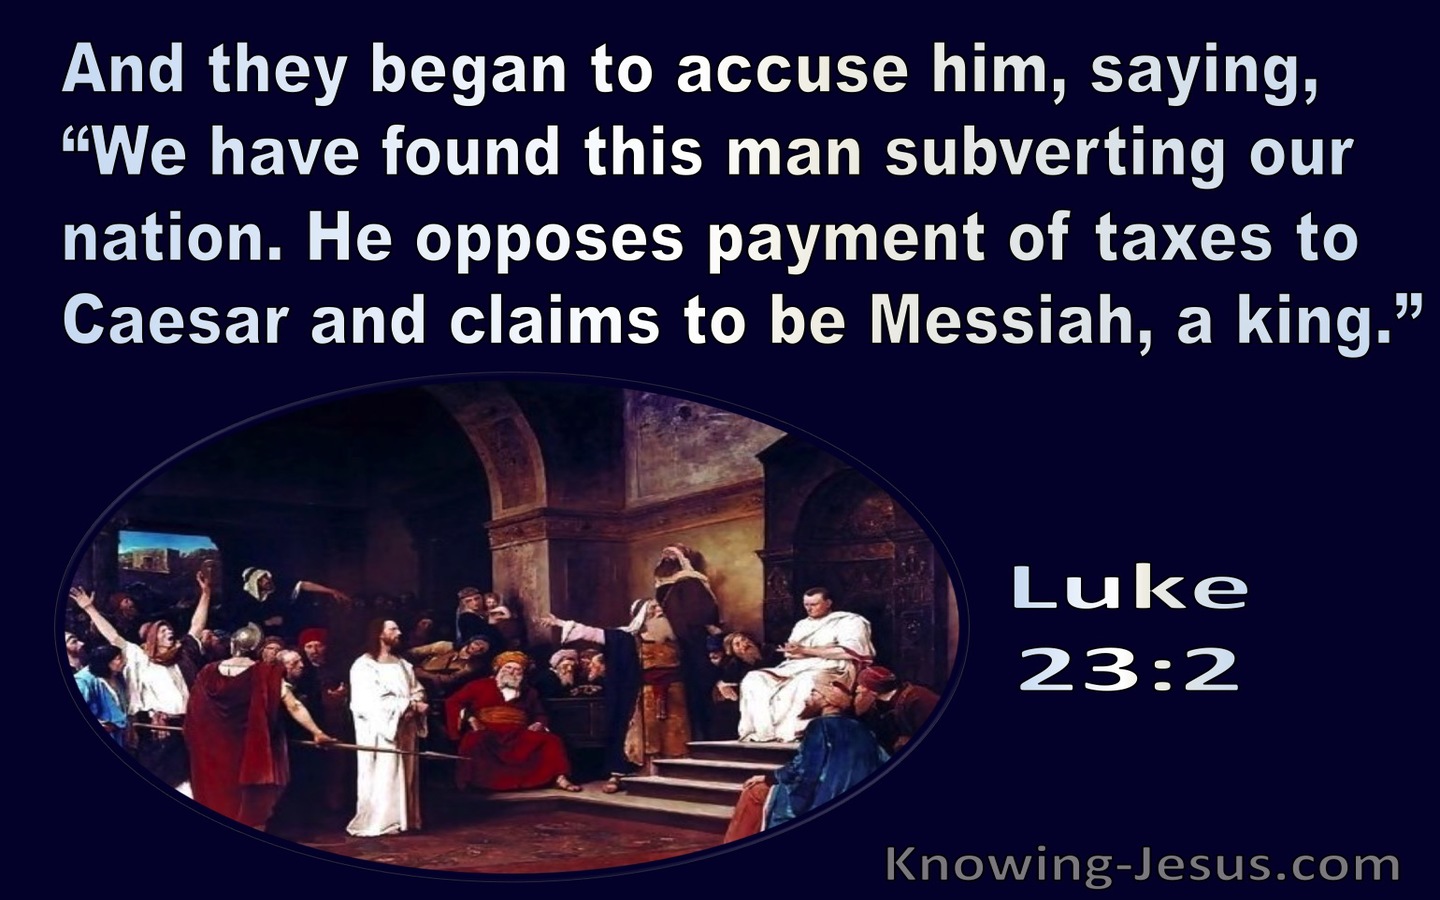 Luke 23:2 They Began To Accuse Him Sayind We Found This Man Subverting Our Nation (navy)